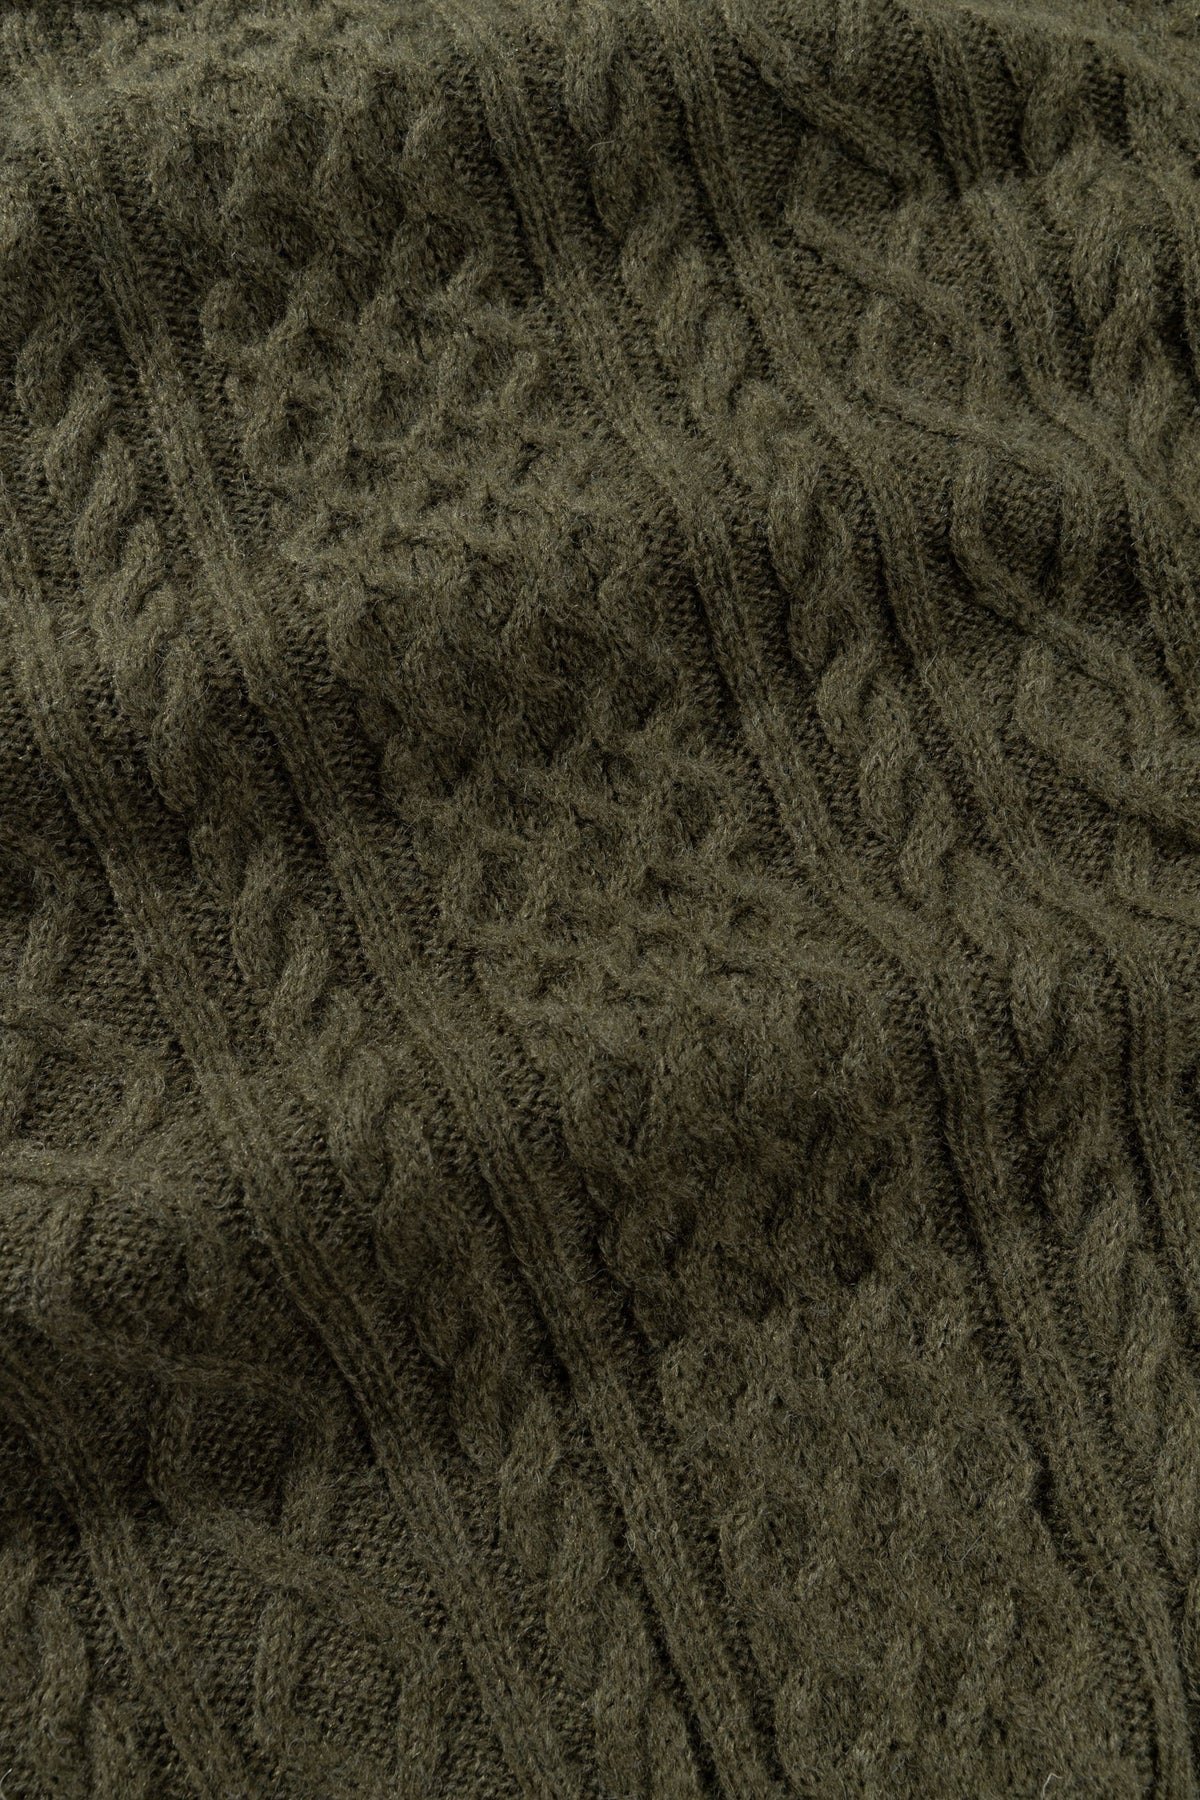 Mohair Fishermans Knit - Olive